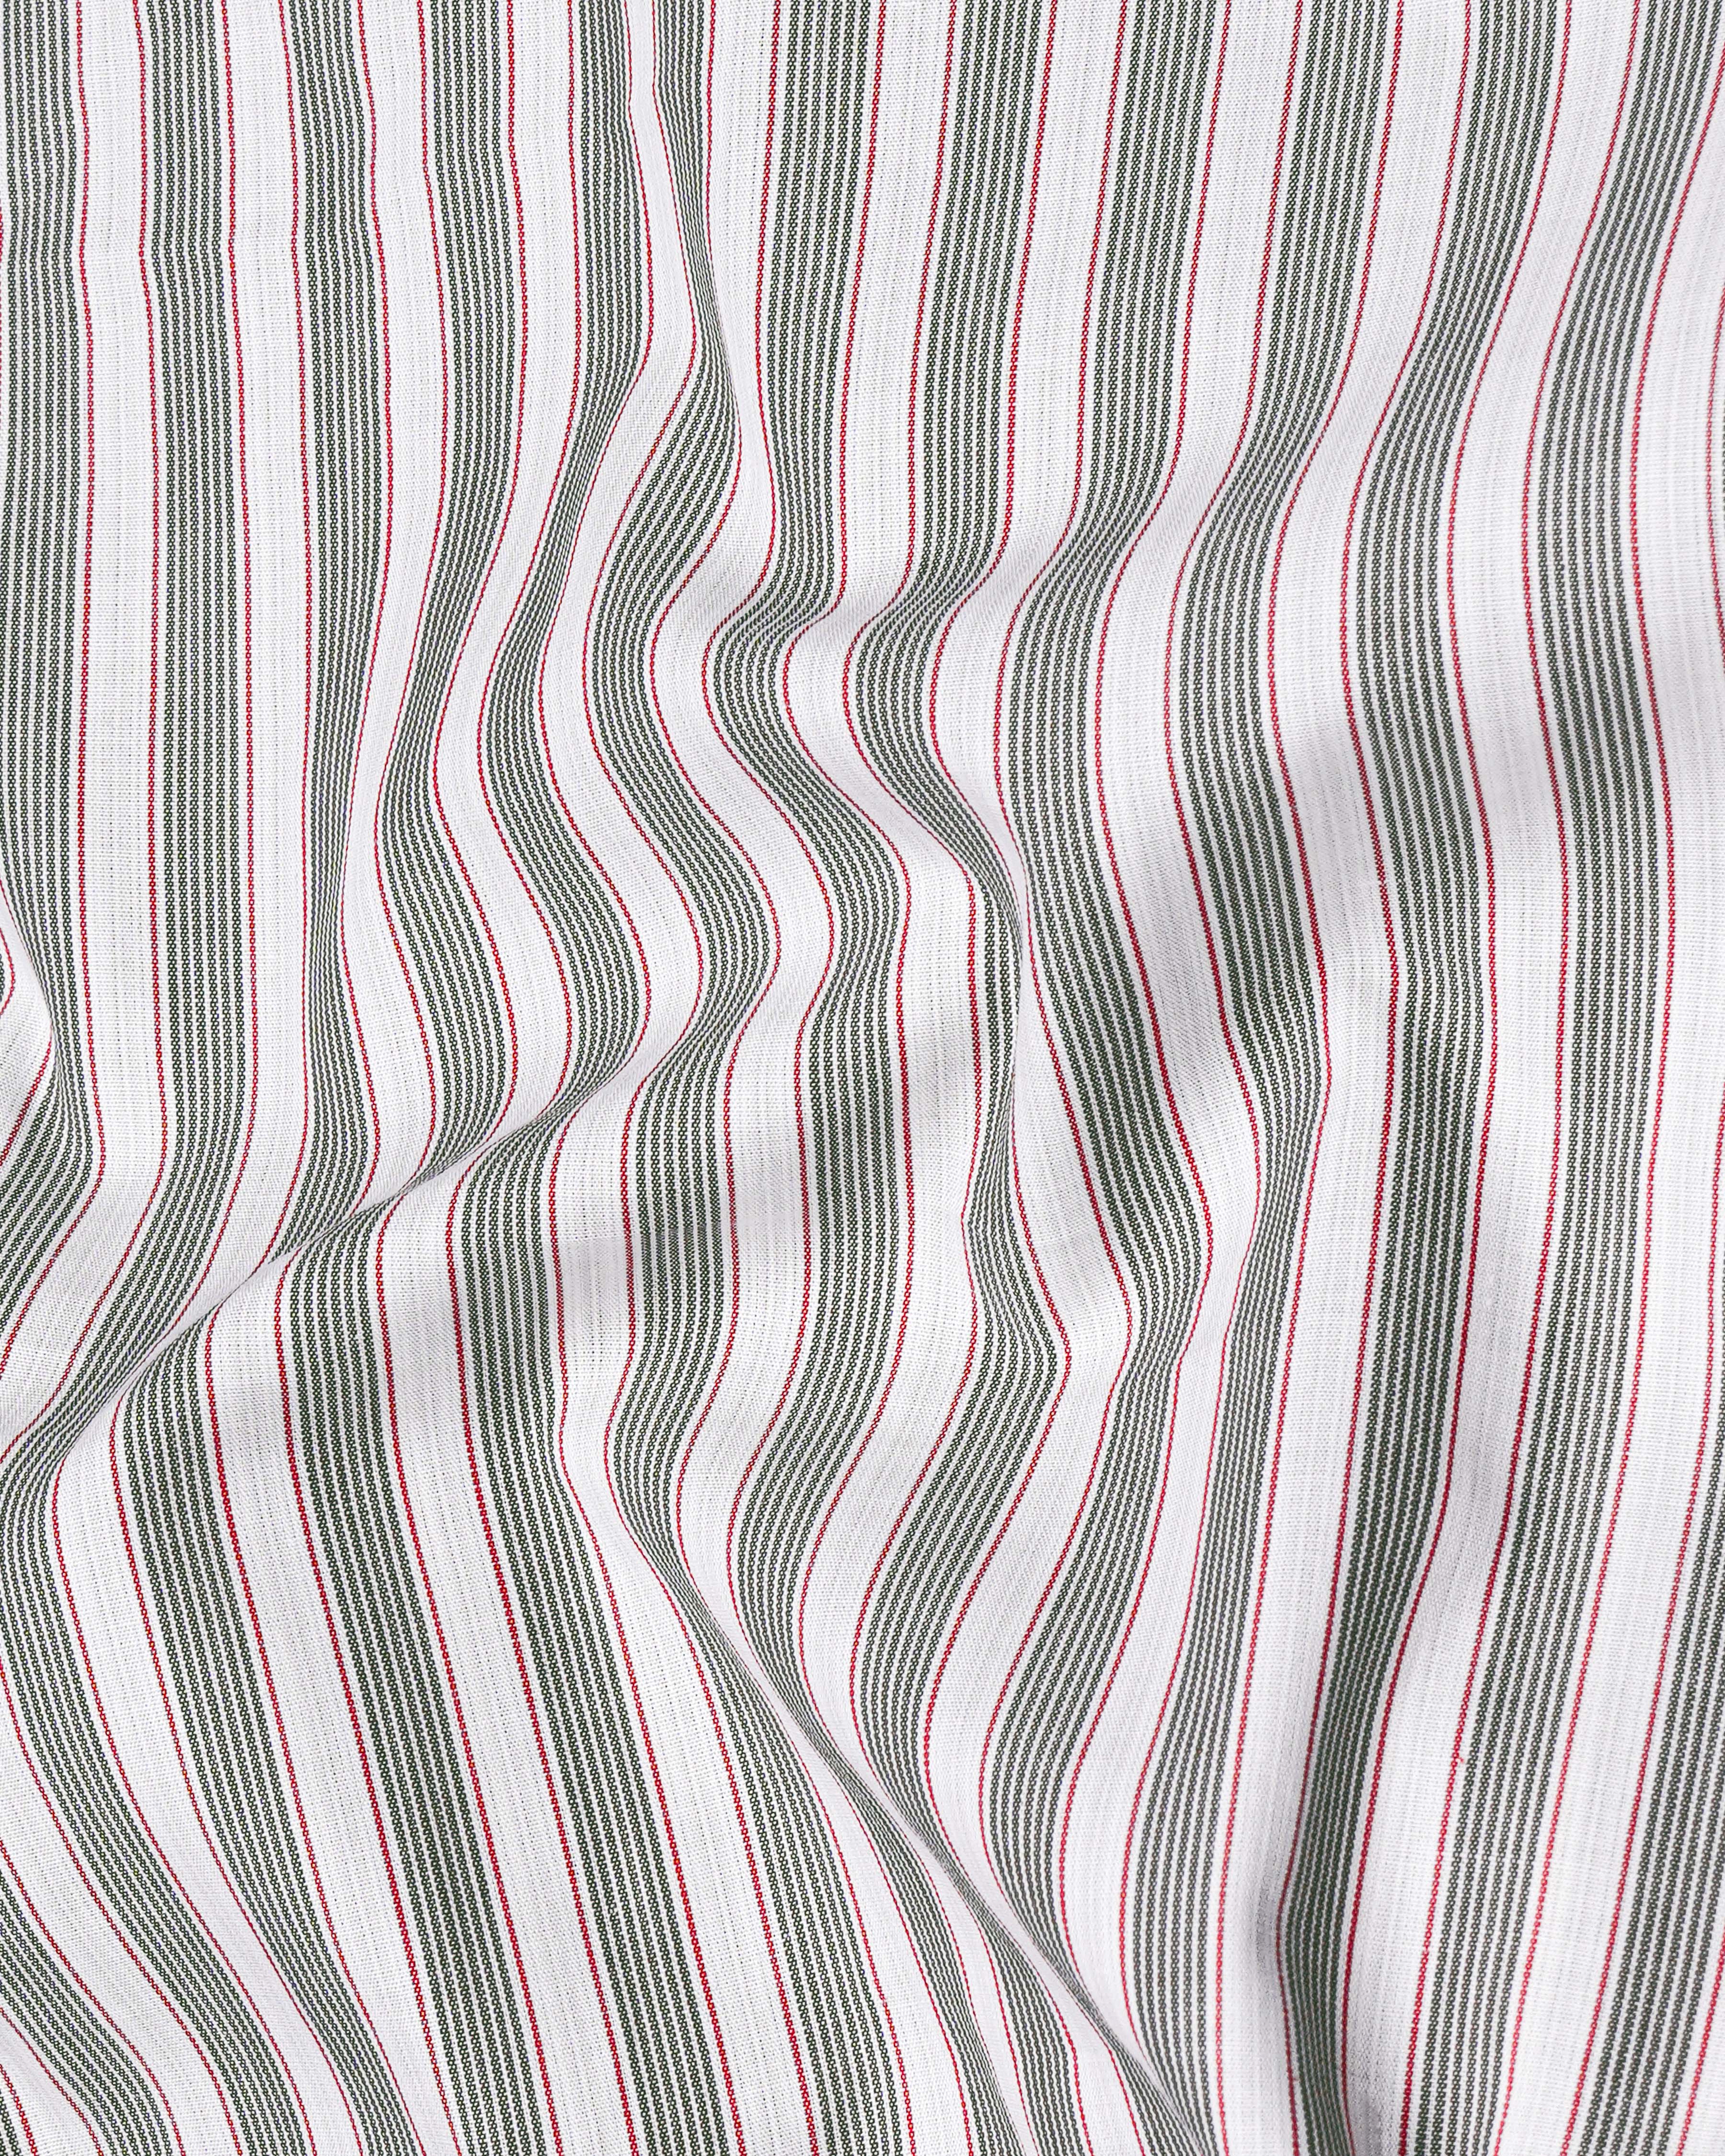 Bright White with Mallard Green and Monza Red Striped Premium Cotton Shirt 8493-38,8493-H-38,8493-39,8493-H-39,8493-40,8493-H-40,8493-42,8493-H-42,8493-44,8493-H-44,8493-46,8493-H-46,8493-48,8493-H-48,8493-50,8493-H-50,8493-52,8493-H-52